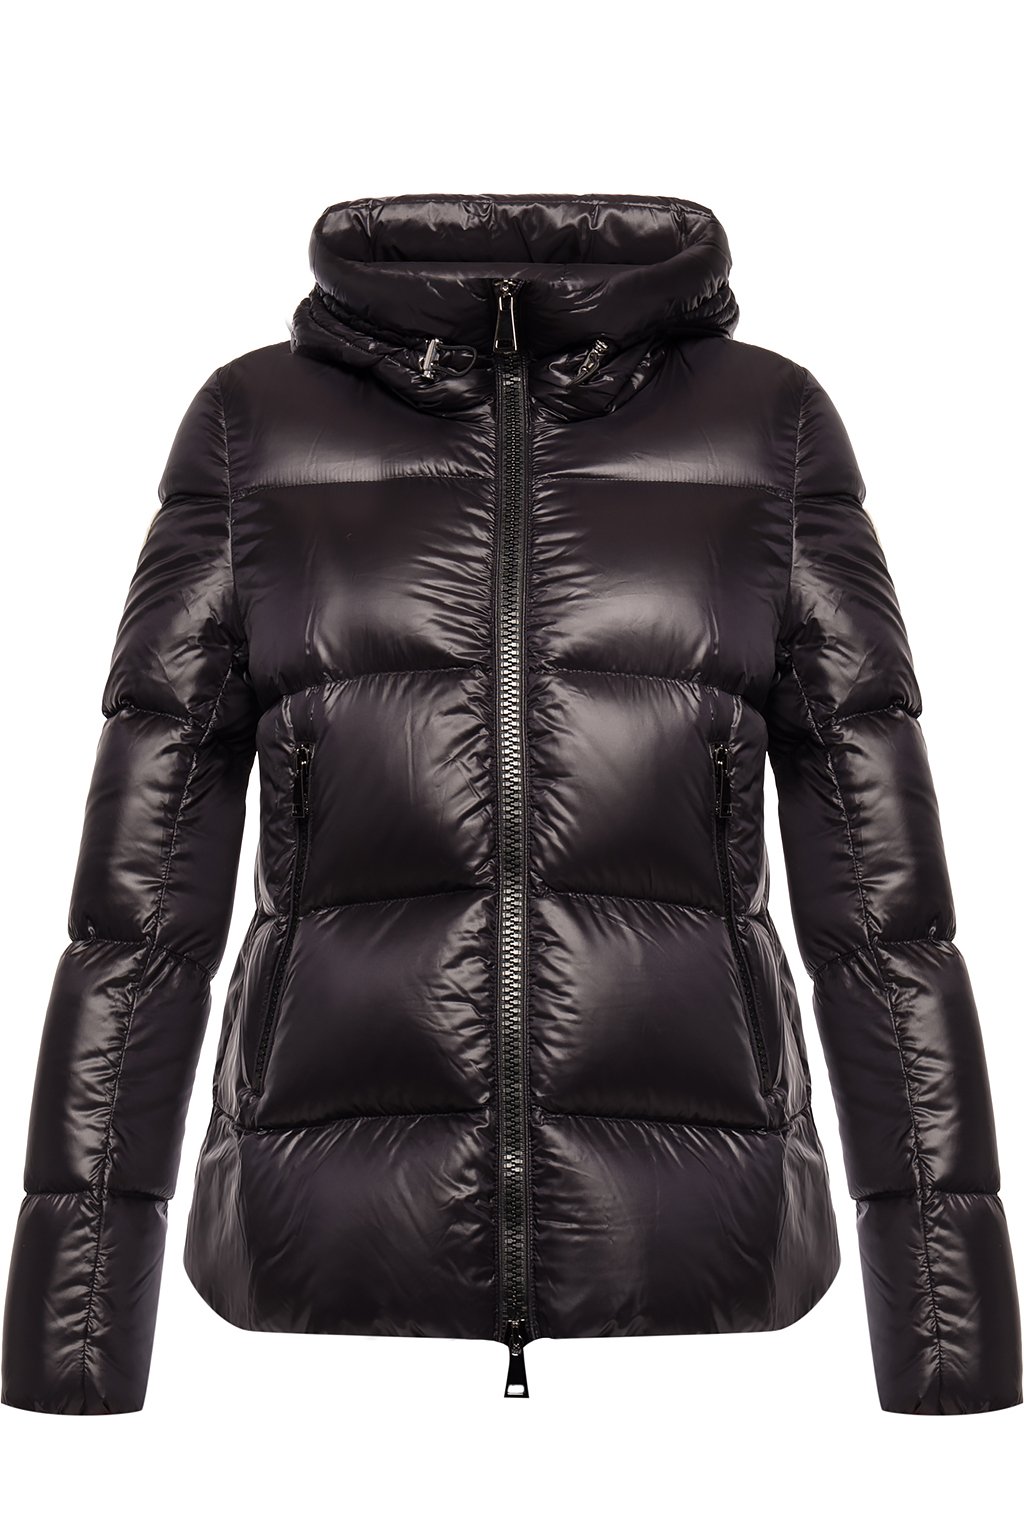 Moncler 'Seritte' quilted down jacket | Women's Clothing | Vitkac